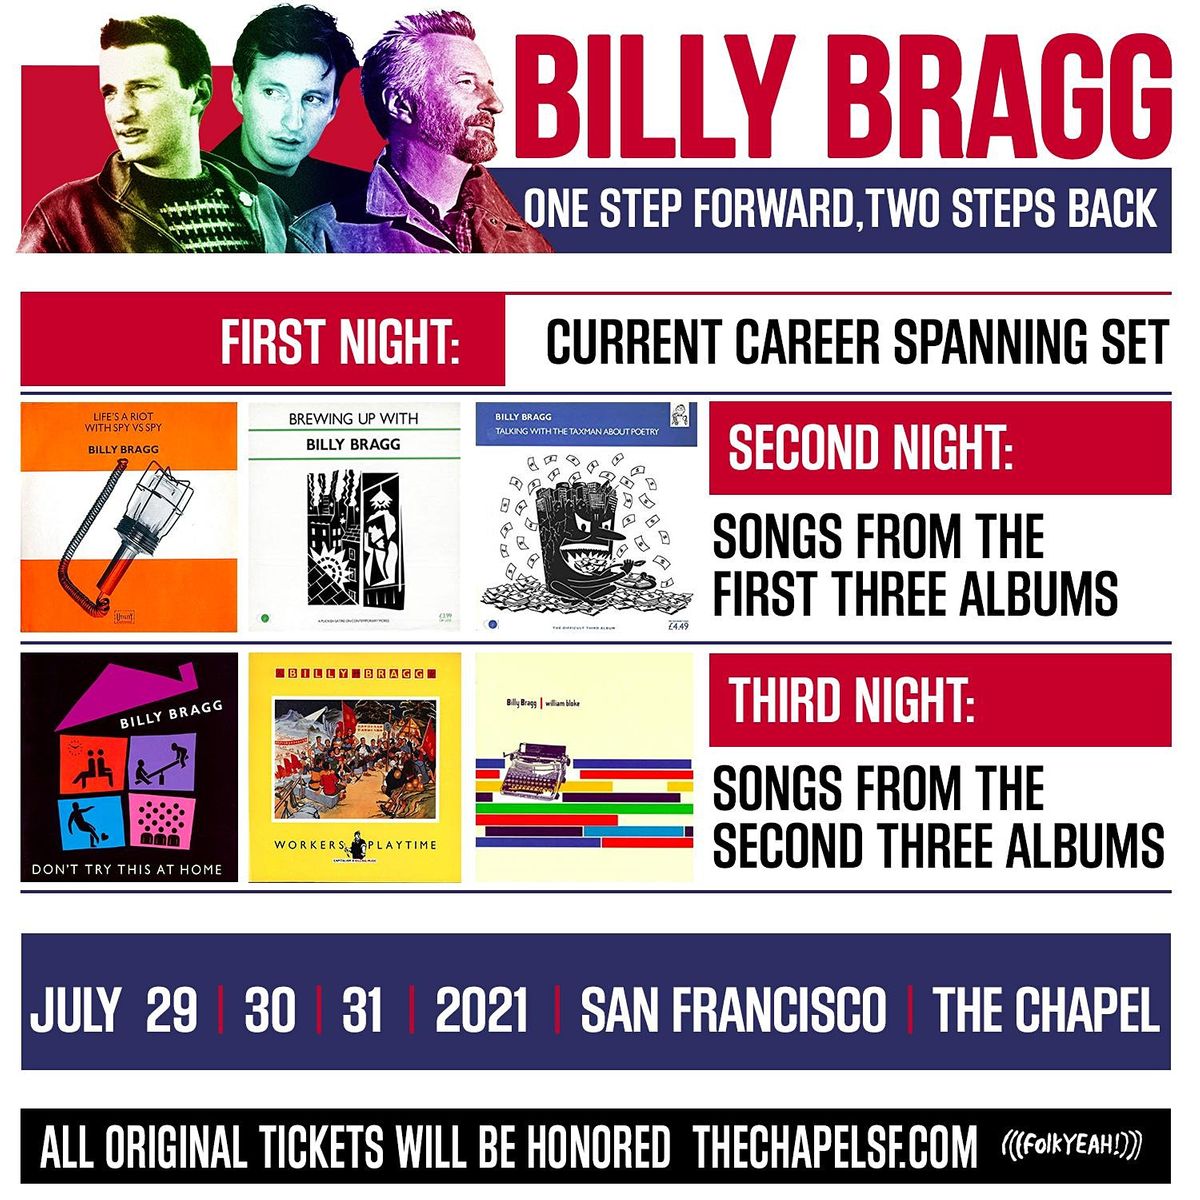 Billy Bragg - One Step Forward, Two Steps Back Tour